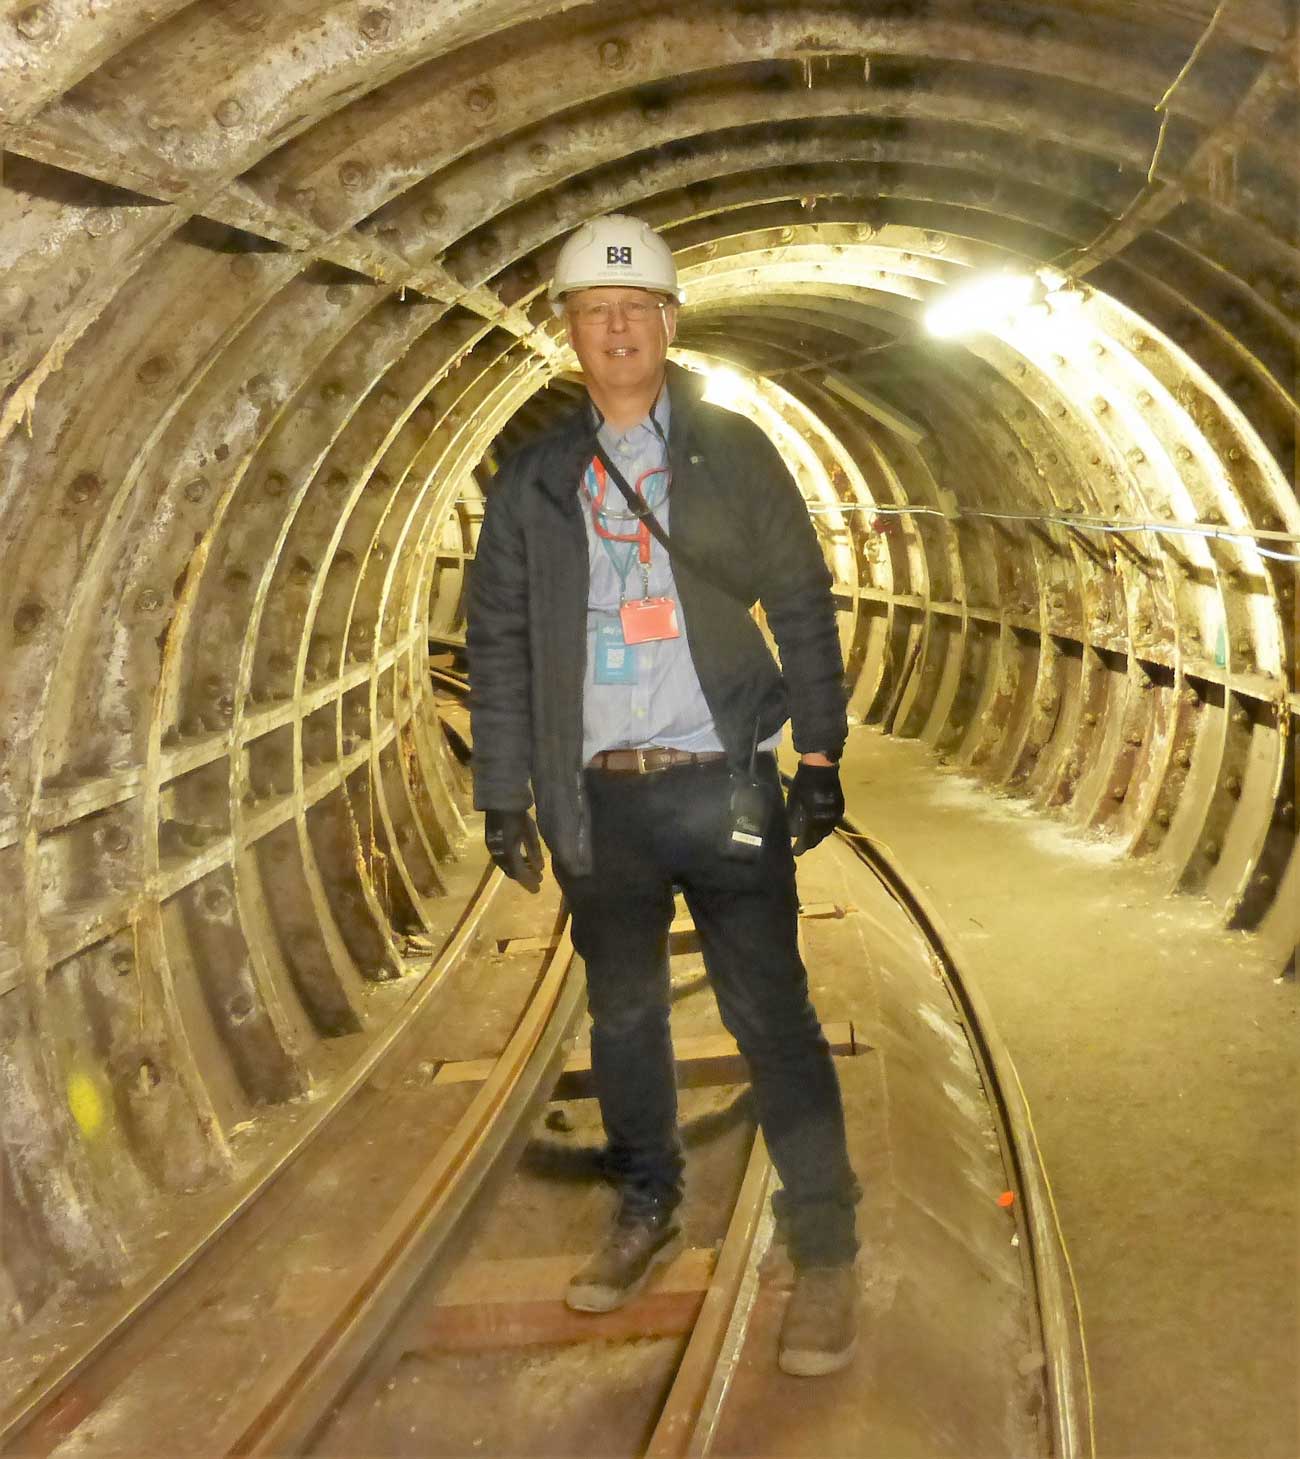 Steve Farrow, Construction Manager for the Mail Rail project